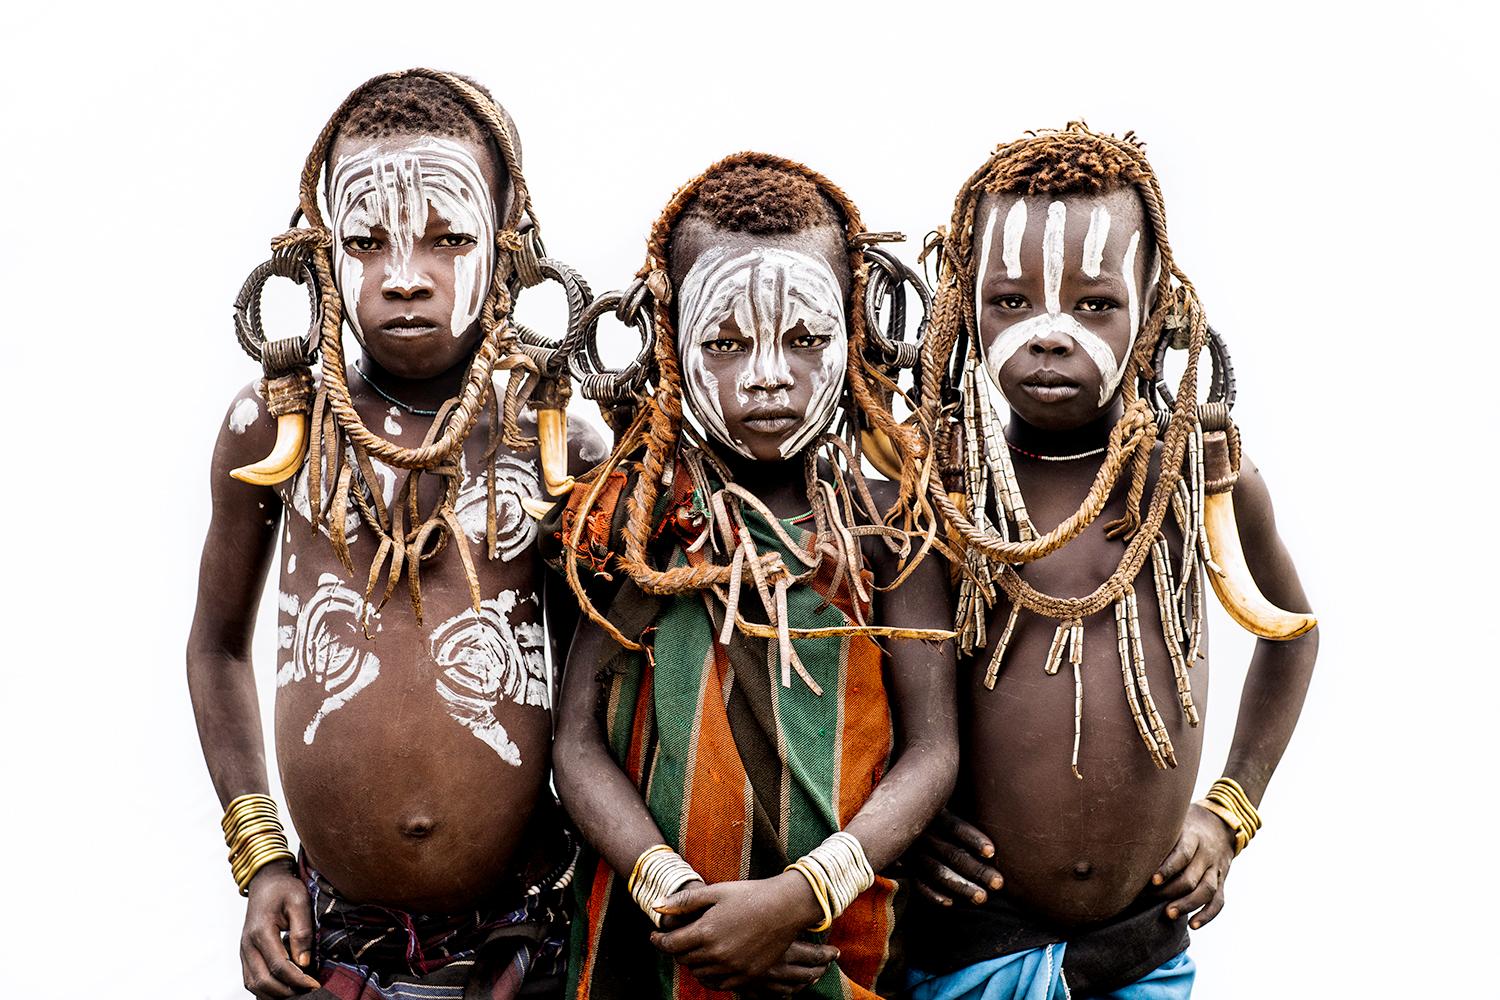 "3 Mursi Boys A" Photography 26.5" x 40" inch Edition 2/7 by Safaa Kagan

Omo Valley, Ethiopia

ABOUT 

Safaa is a Los Angeles based photographer with a mission to dissolve the surface-level barriers presented in humanity. Born in Casablanca,